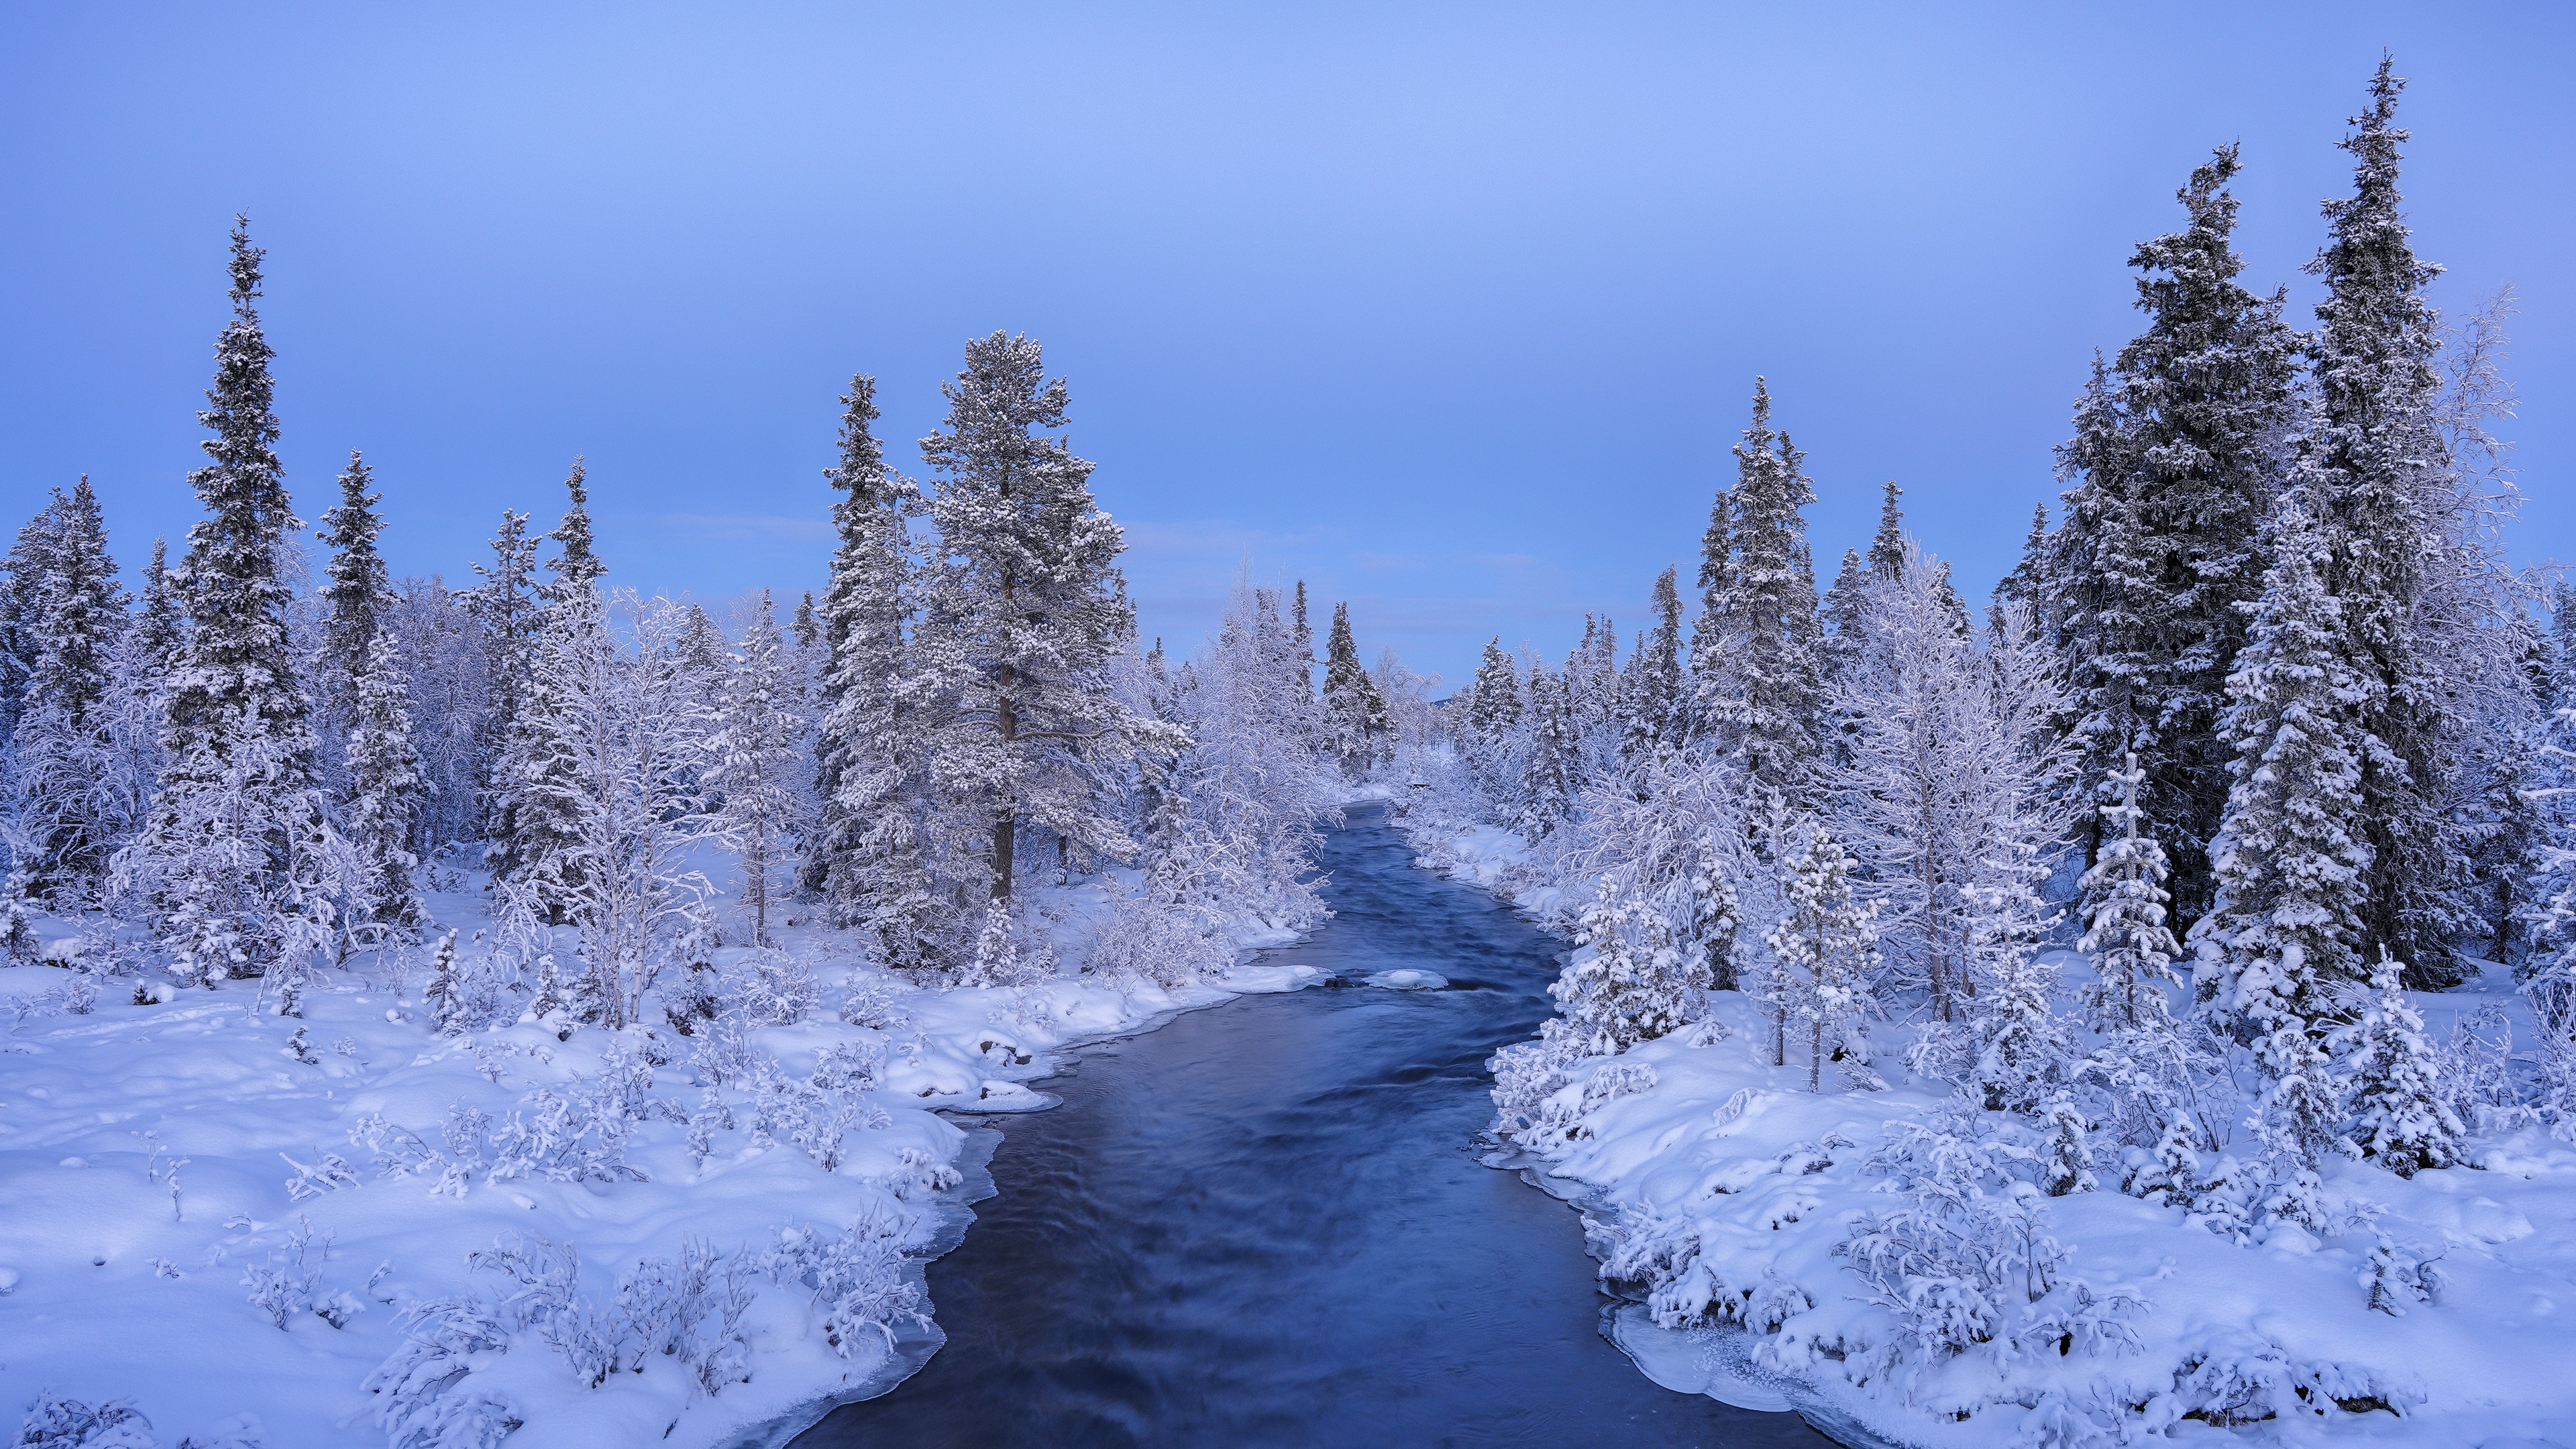 General 3840x2160 nature creeks winter cold outdoors trees water snow